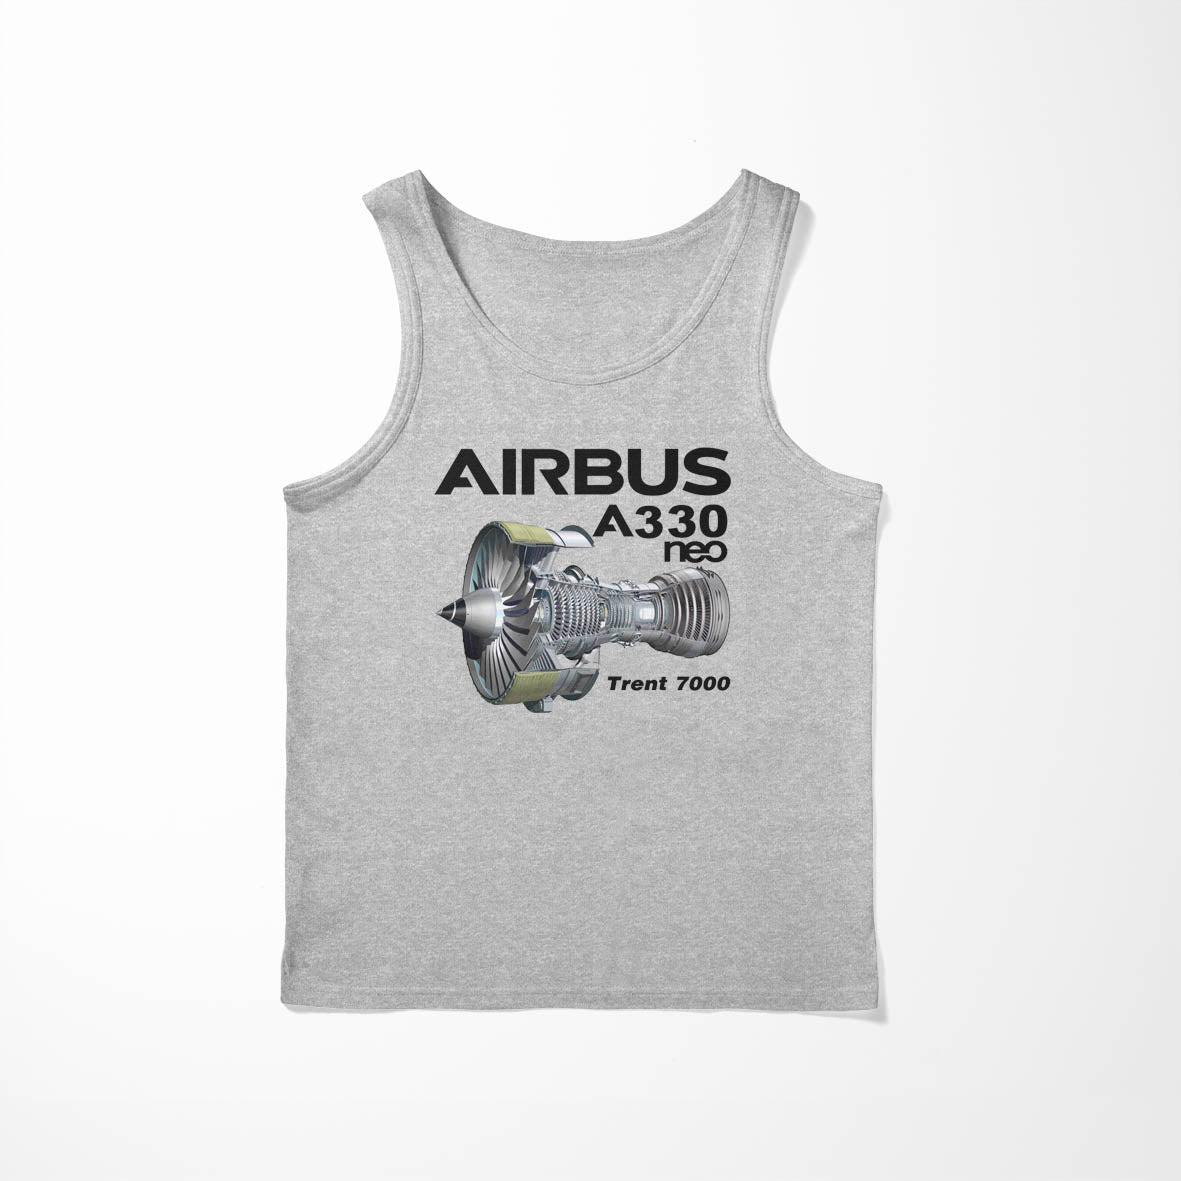 Airbus A330neo & Trent 7000 Engine Designed Tank Tops